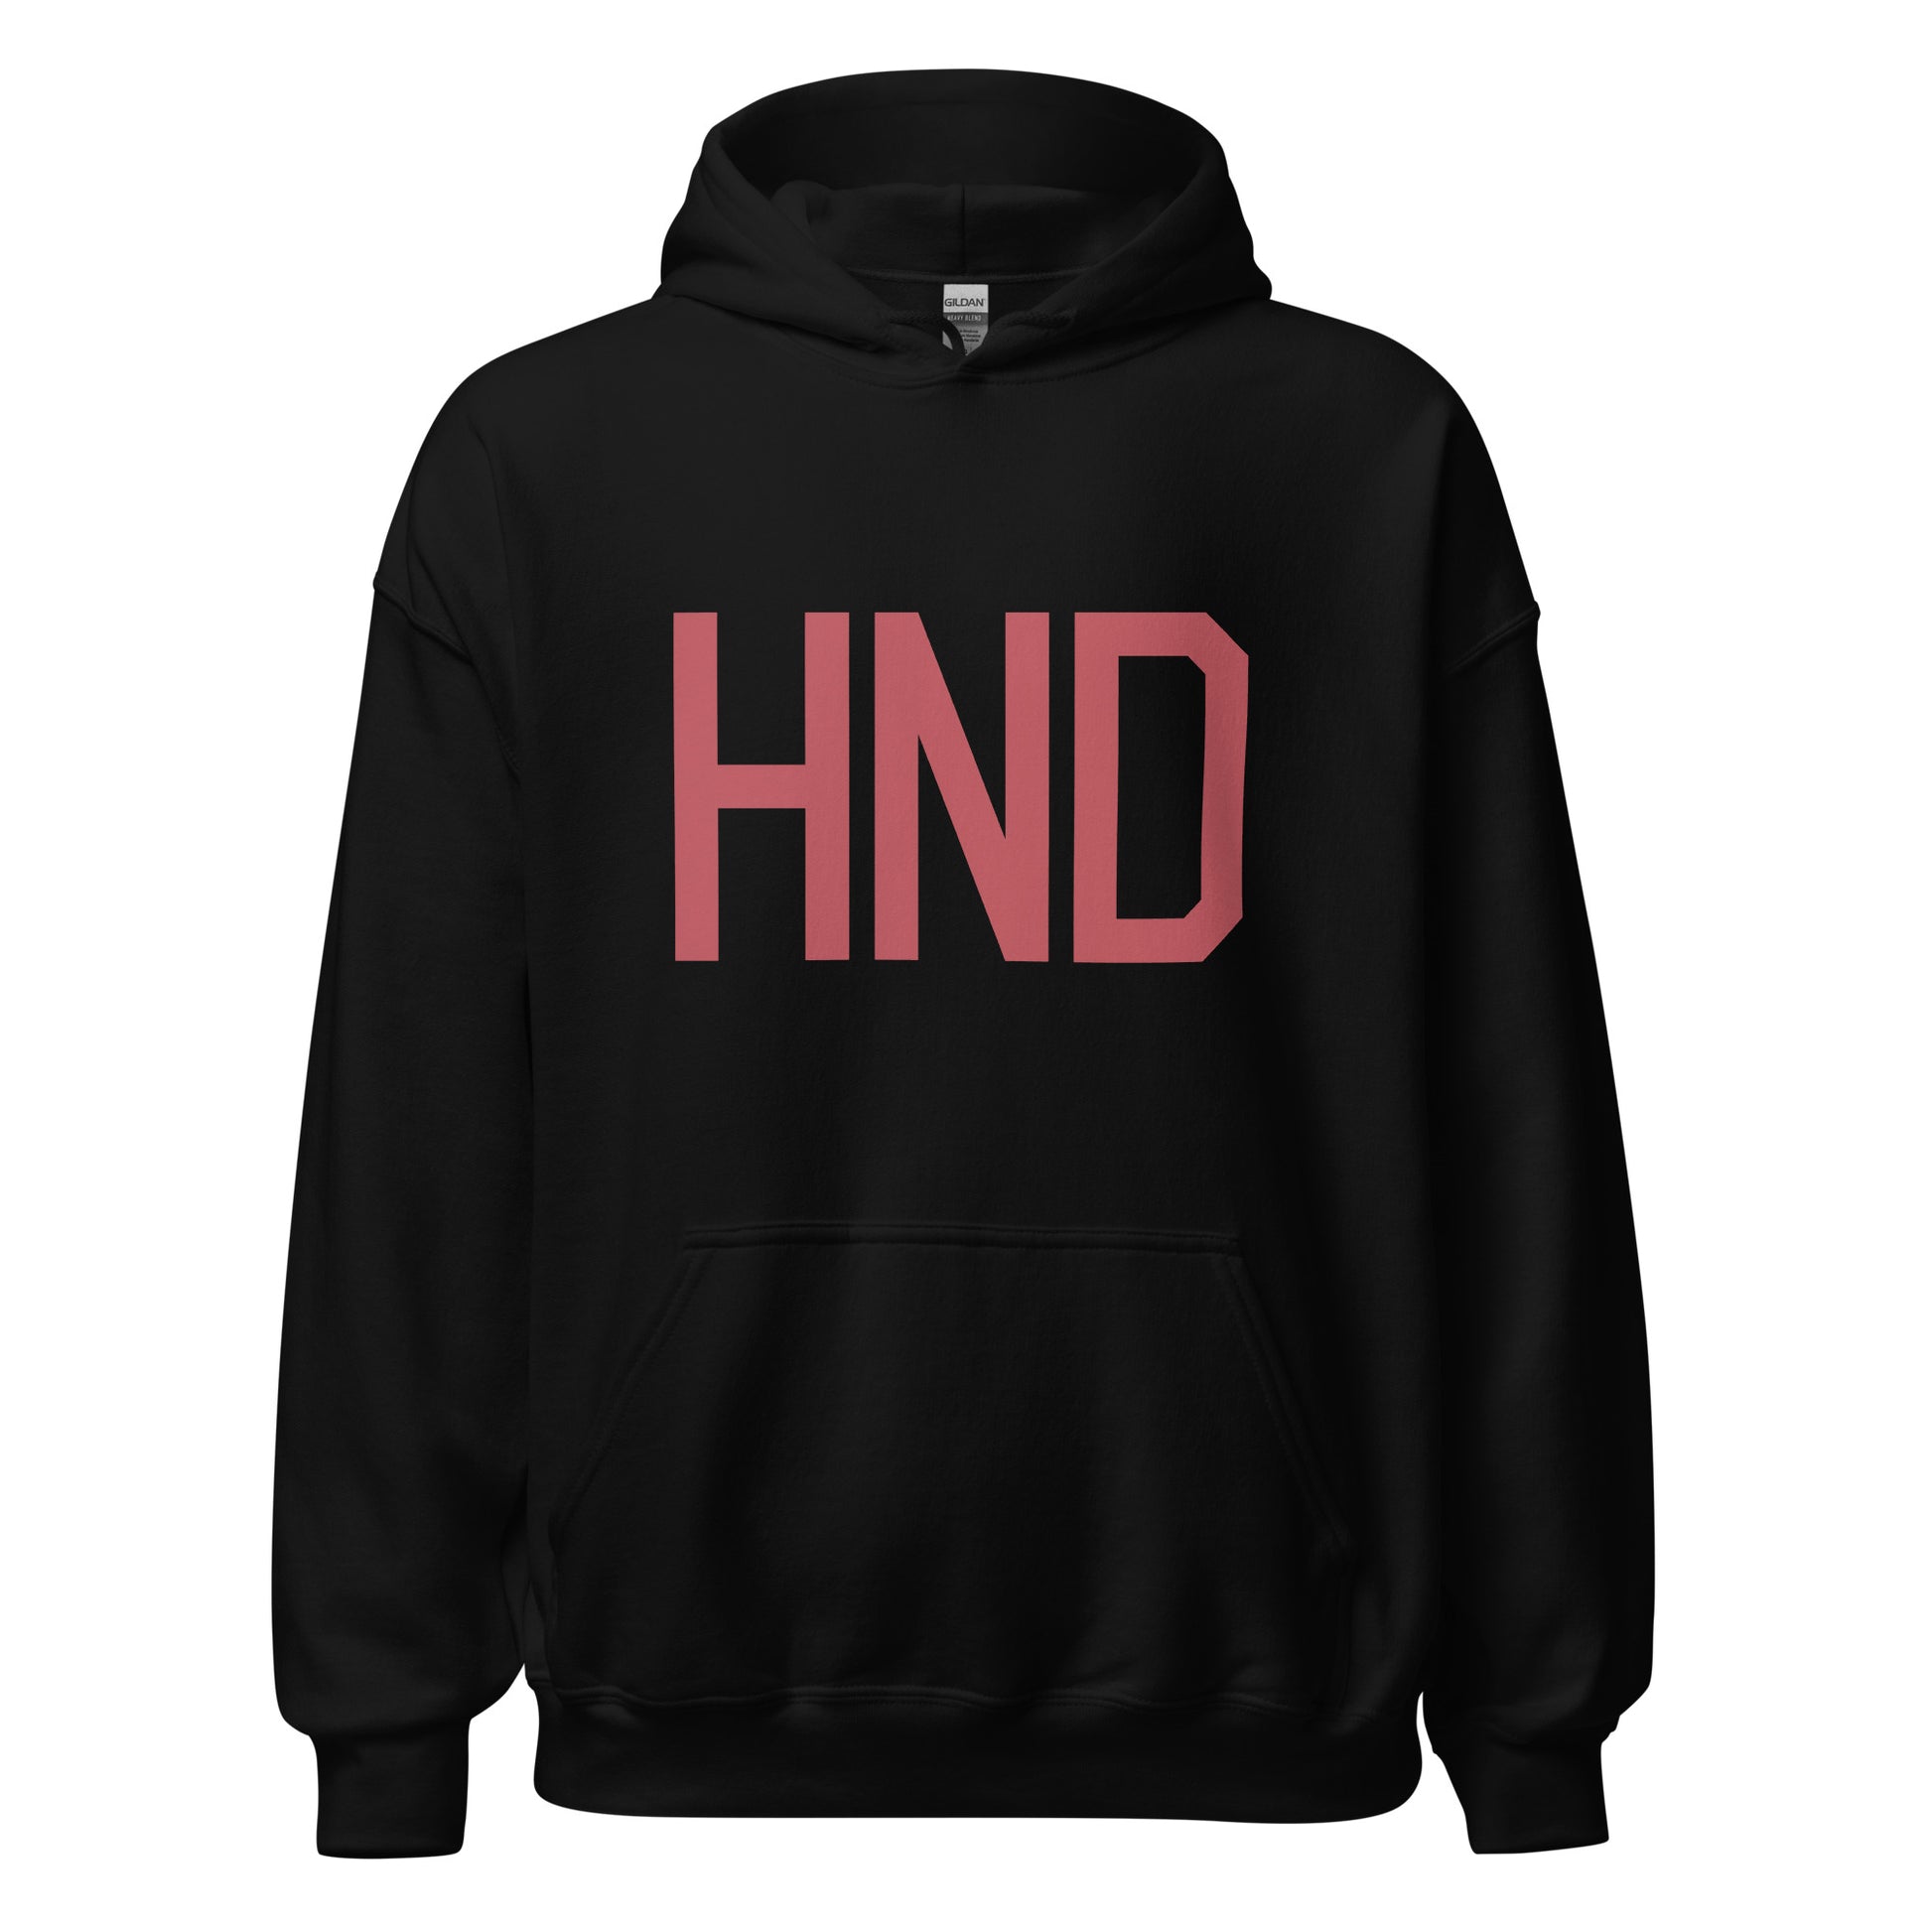 Aviation Enthusiast Hoodie - Deep Pink Graphic • HND Tokyo • YHM Designs - Image 03